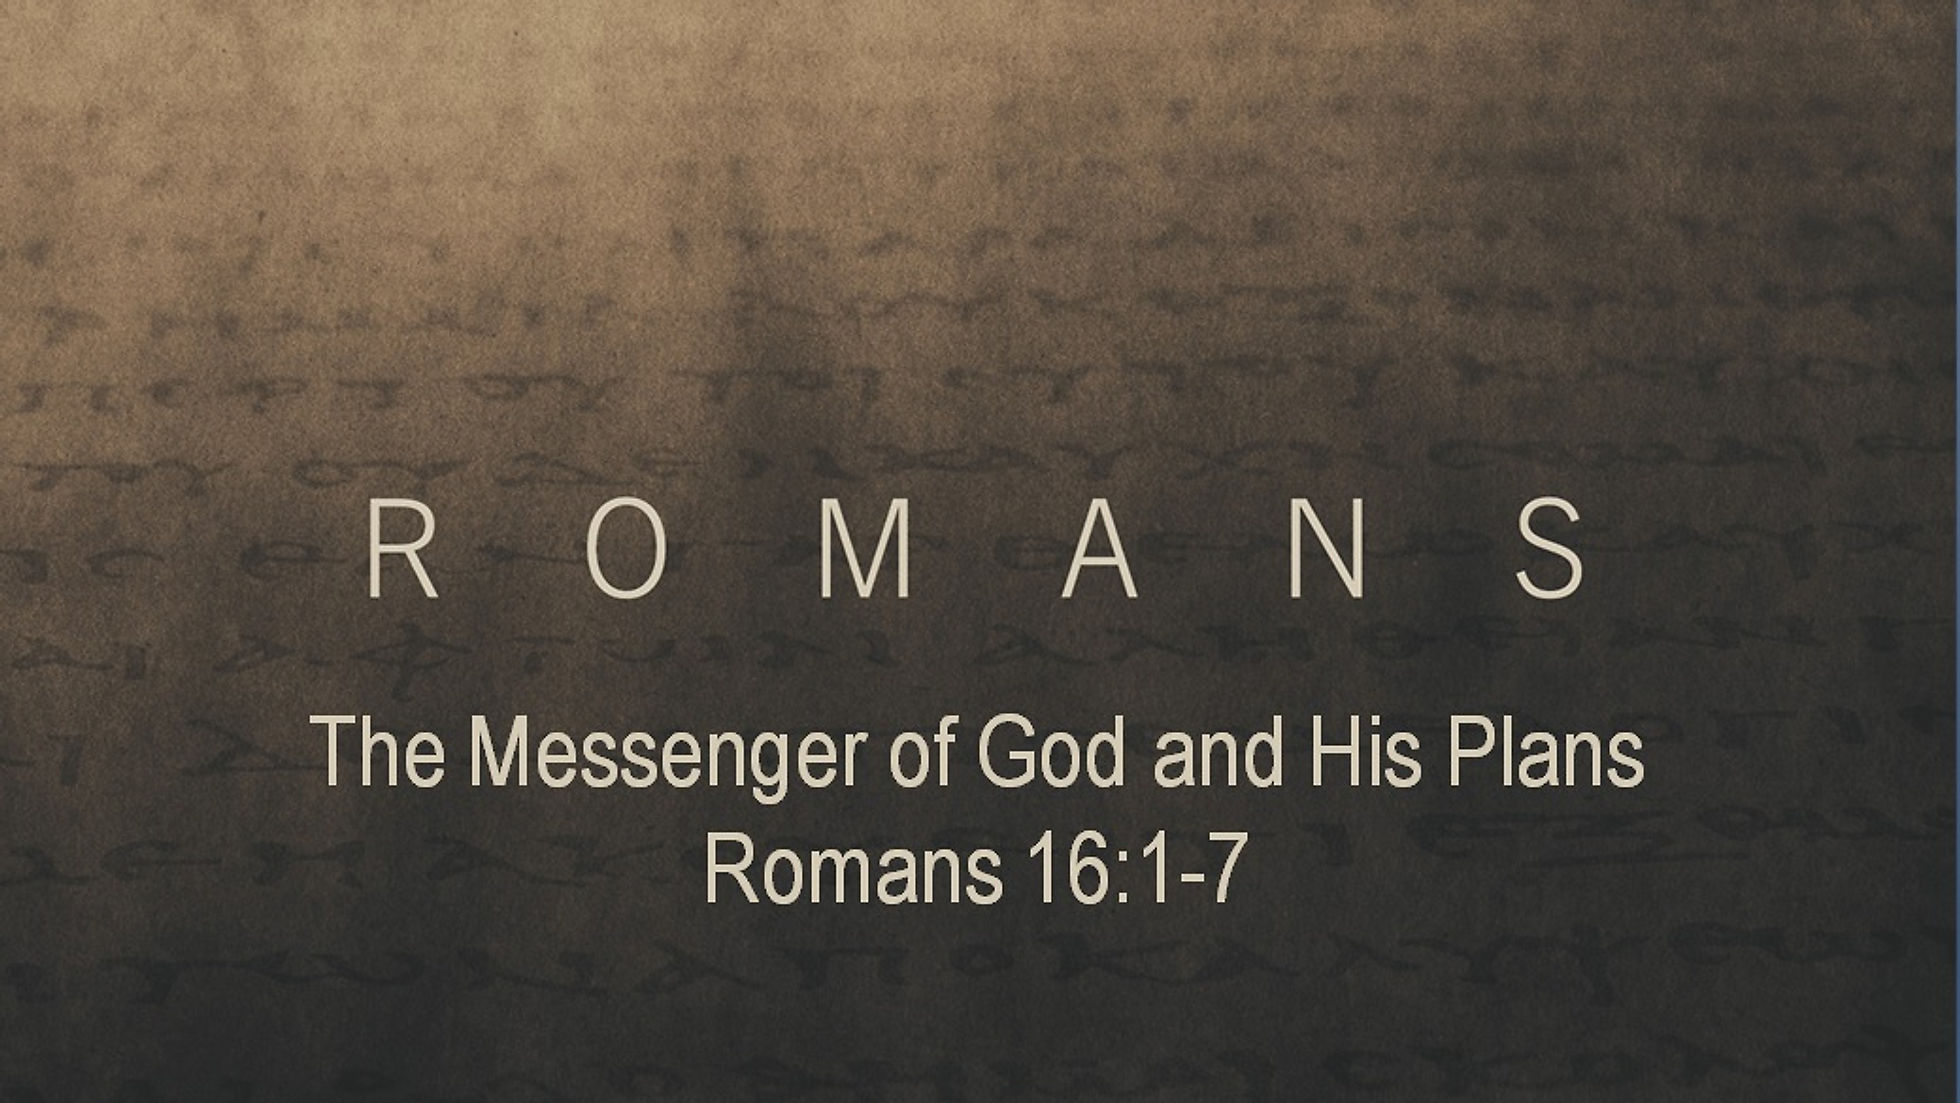 Romans: The Messenger of God and His Plans